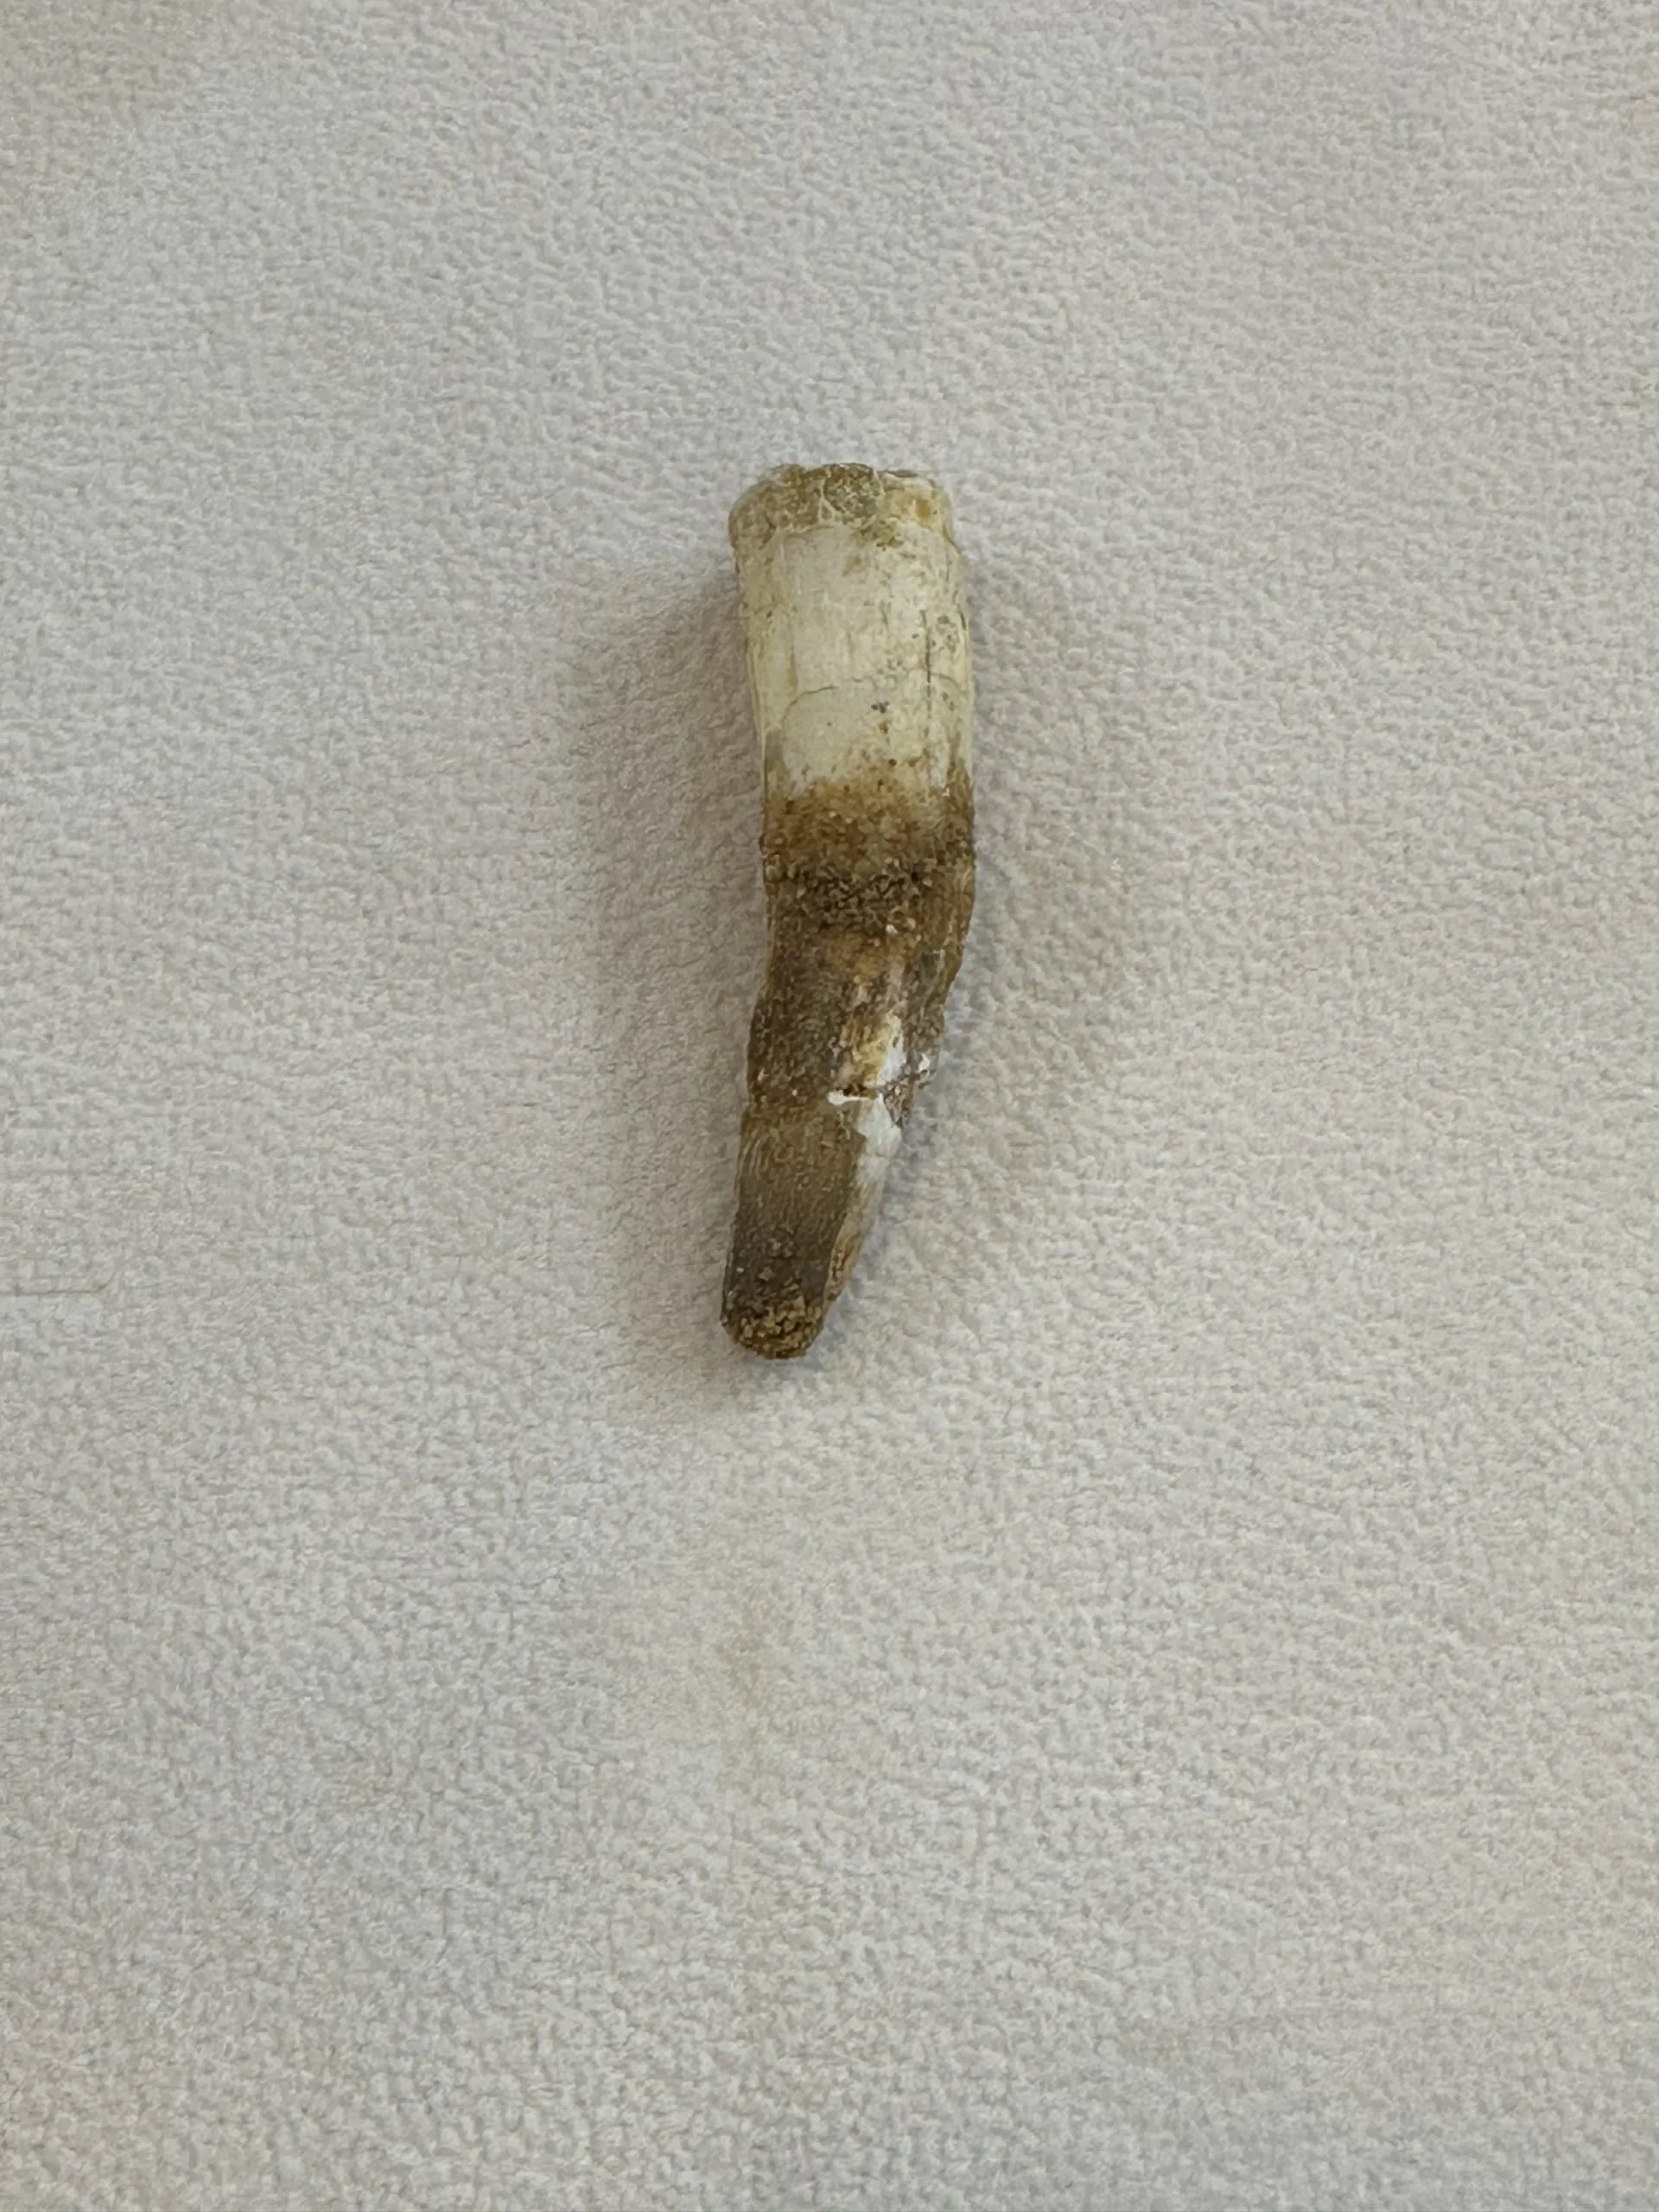 Spinosaurus Tooth, Morocco, curved 2 inch Prehistoric Online